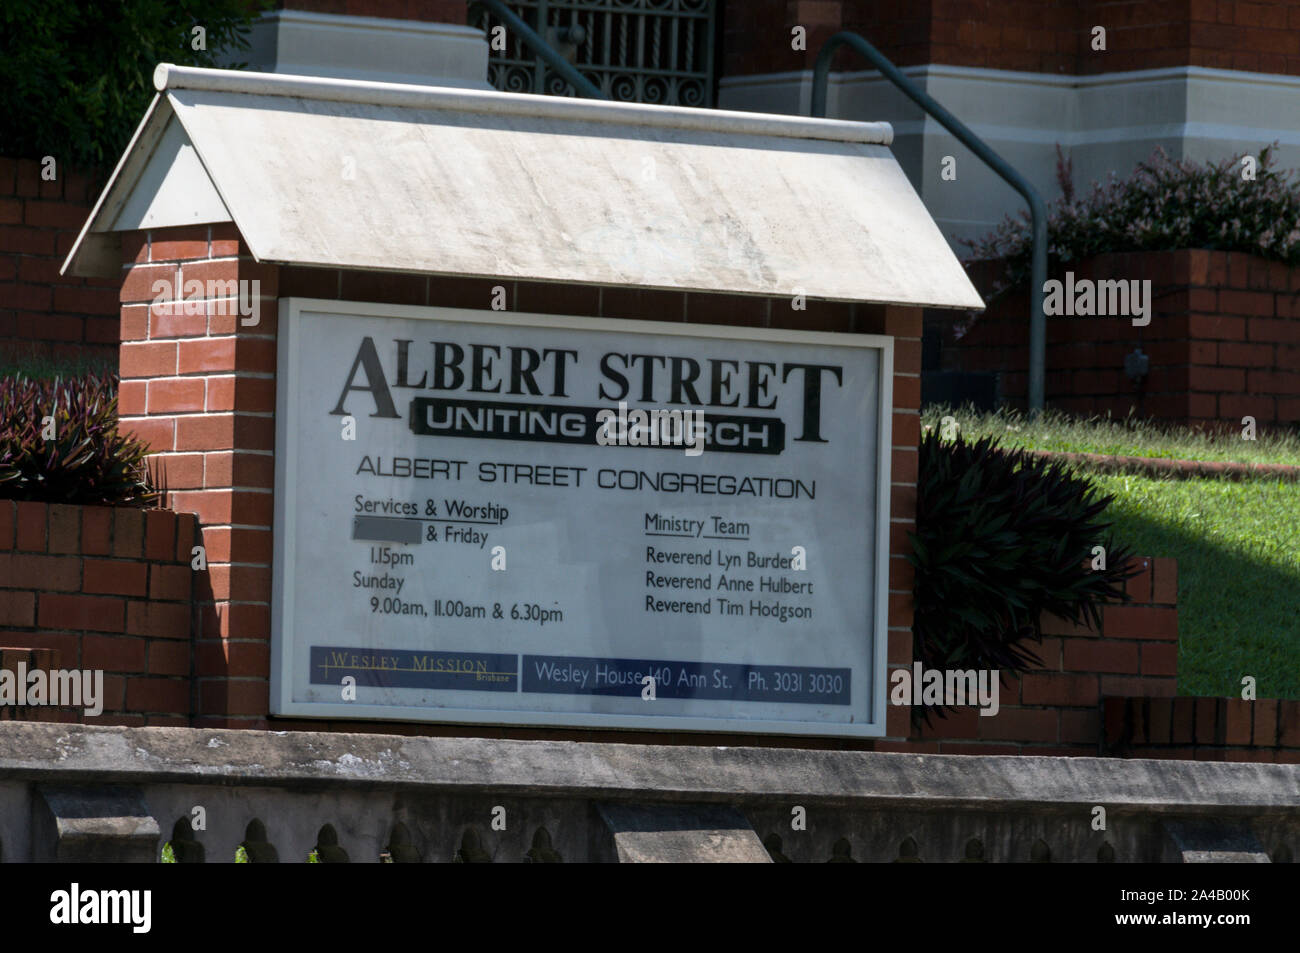 Albert Street Uniting Church a Wesley Church in Albert Street surrounded by modern office towers in Brisbane, Queensland,Australia Stock Photo